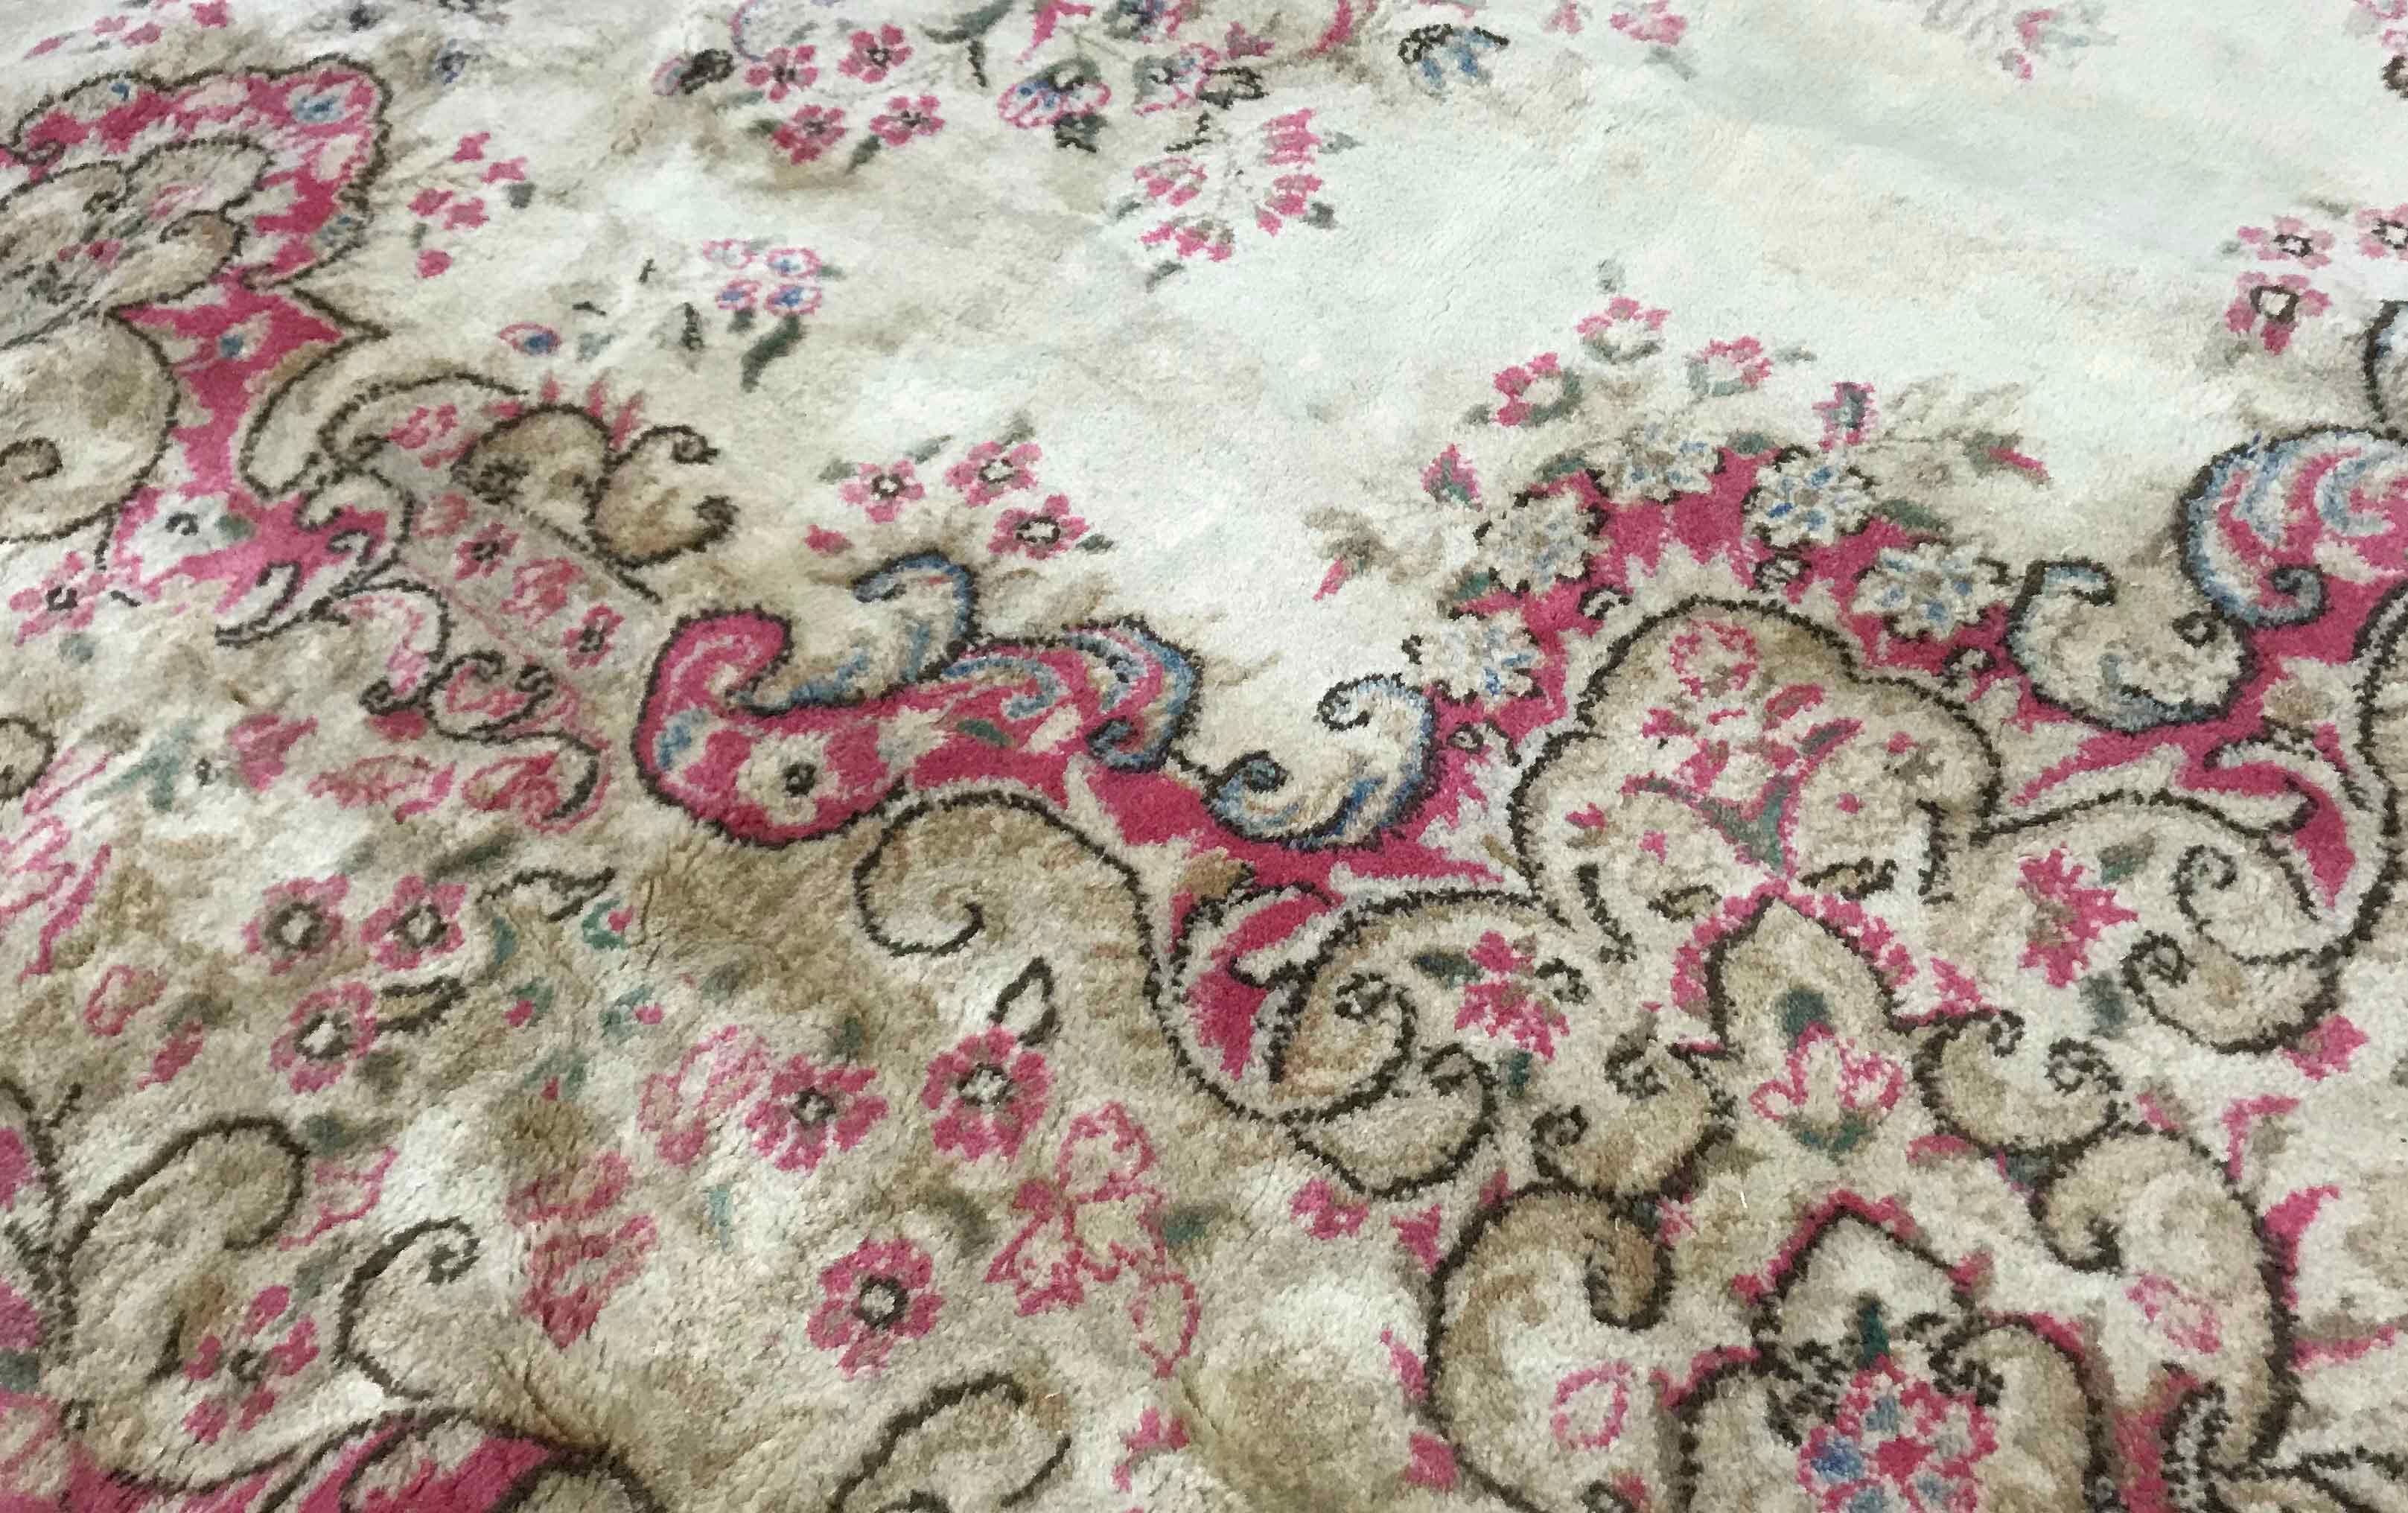 Vintage Persian Kerman rug, circa 1940. The ivory field containing soft floral designs all enclosed within a soft rose and green swirling border to complete this peaceful picture and wonderful looking rug. Size: 7'9 x 10'.